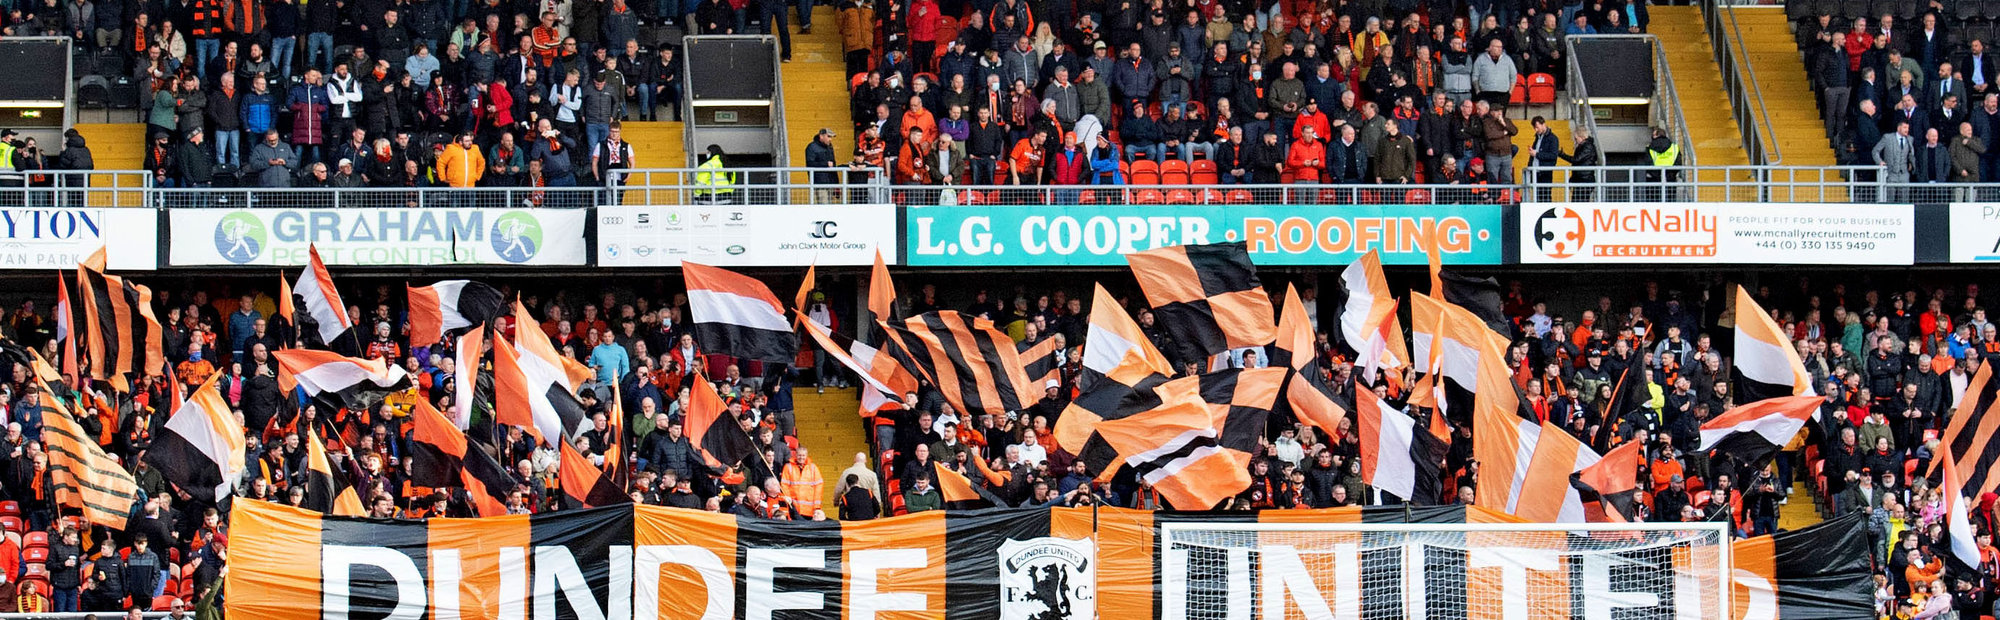 fred Fremtrædende imperium SELECT YOUR REPRESENTATIVE ON THE DUNDEE UNITED SUPPORTERS GROUP FOR 2022 | Dundee  United Football Club